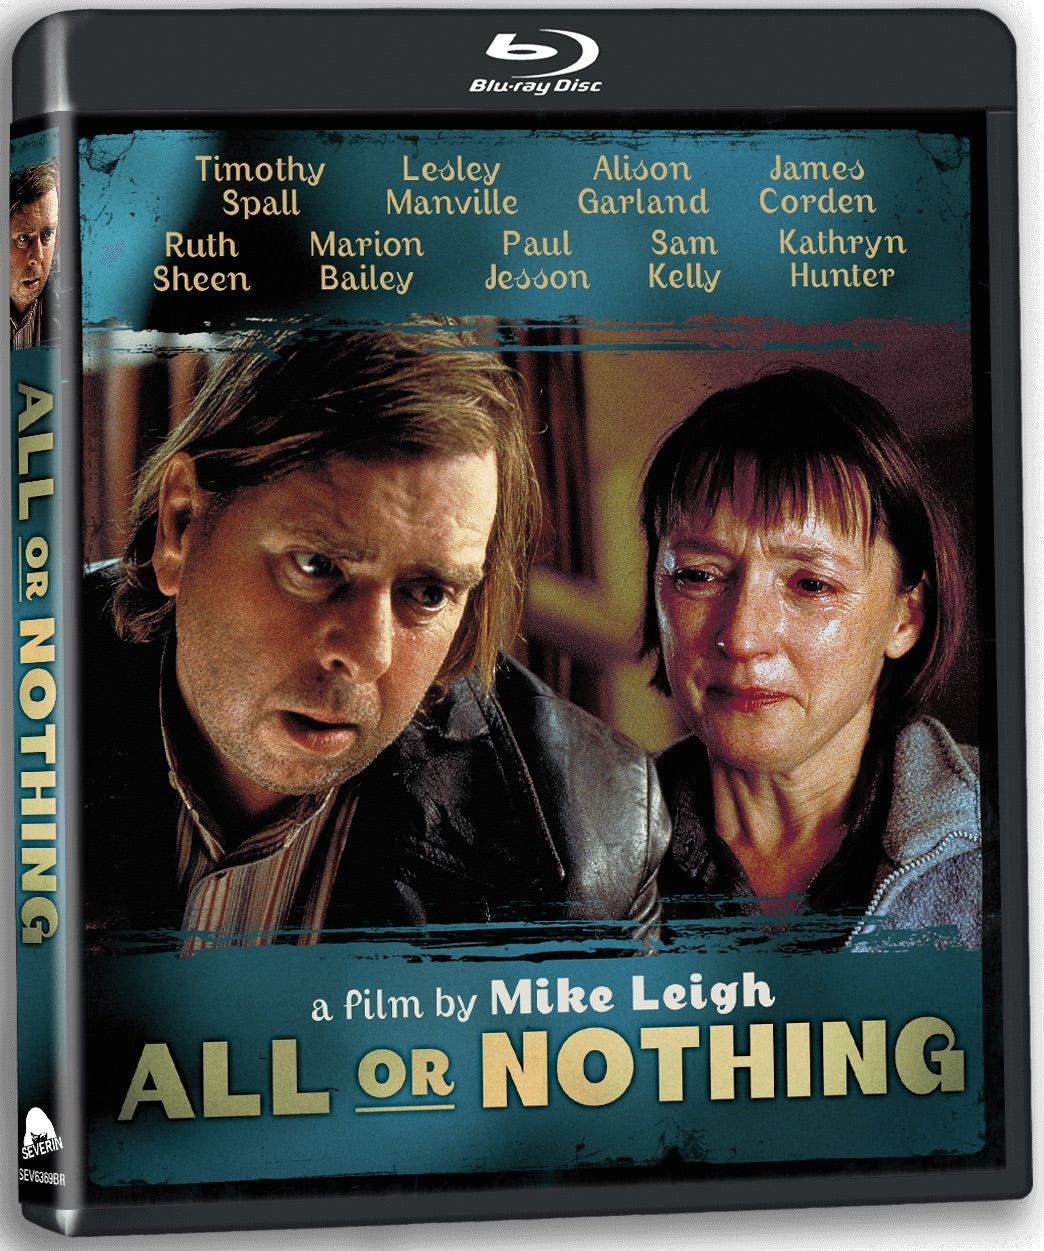 All or Nothing [Blu-ray]